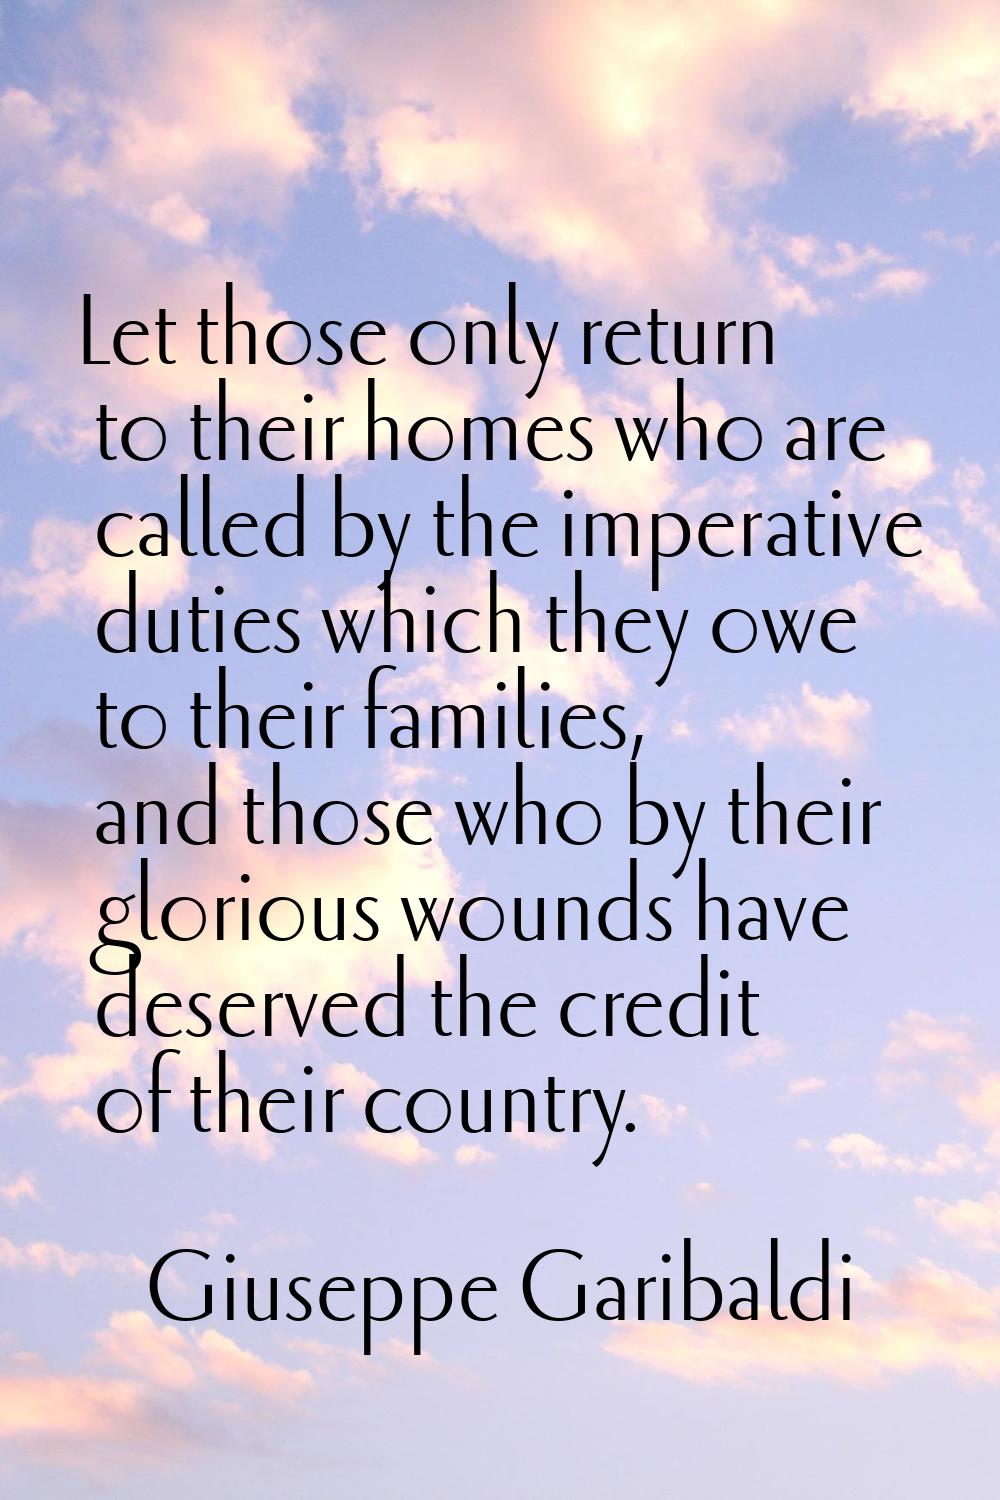 Let those only return to their homes who are called by the imperative duties which they owe to thei